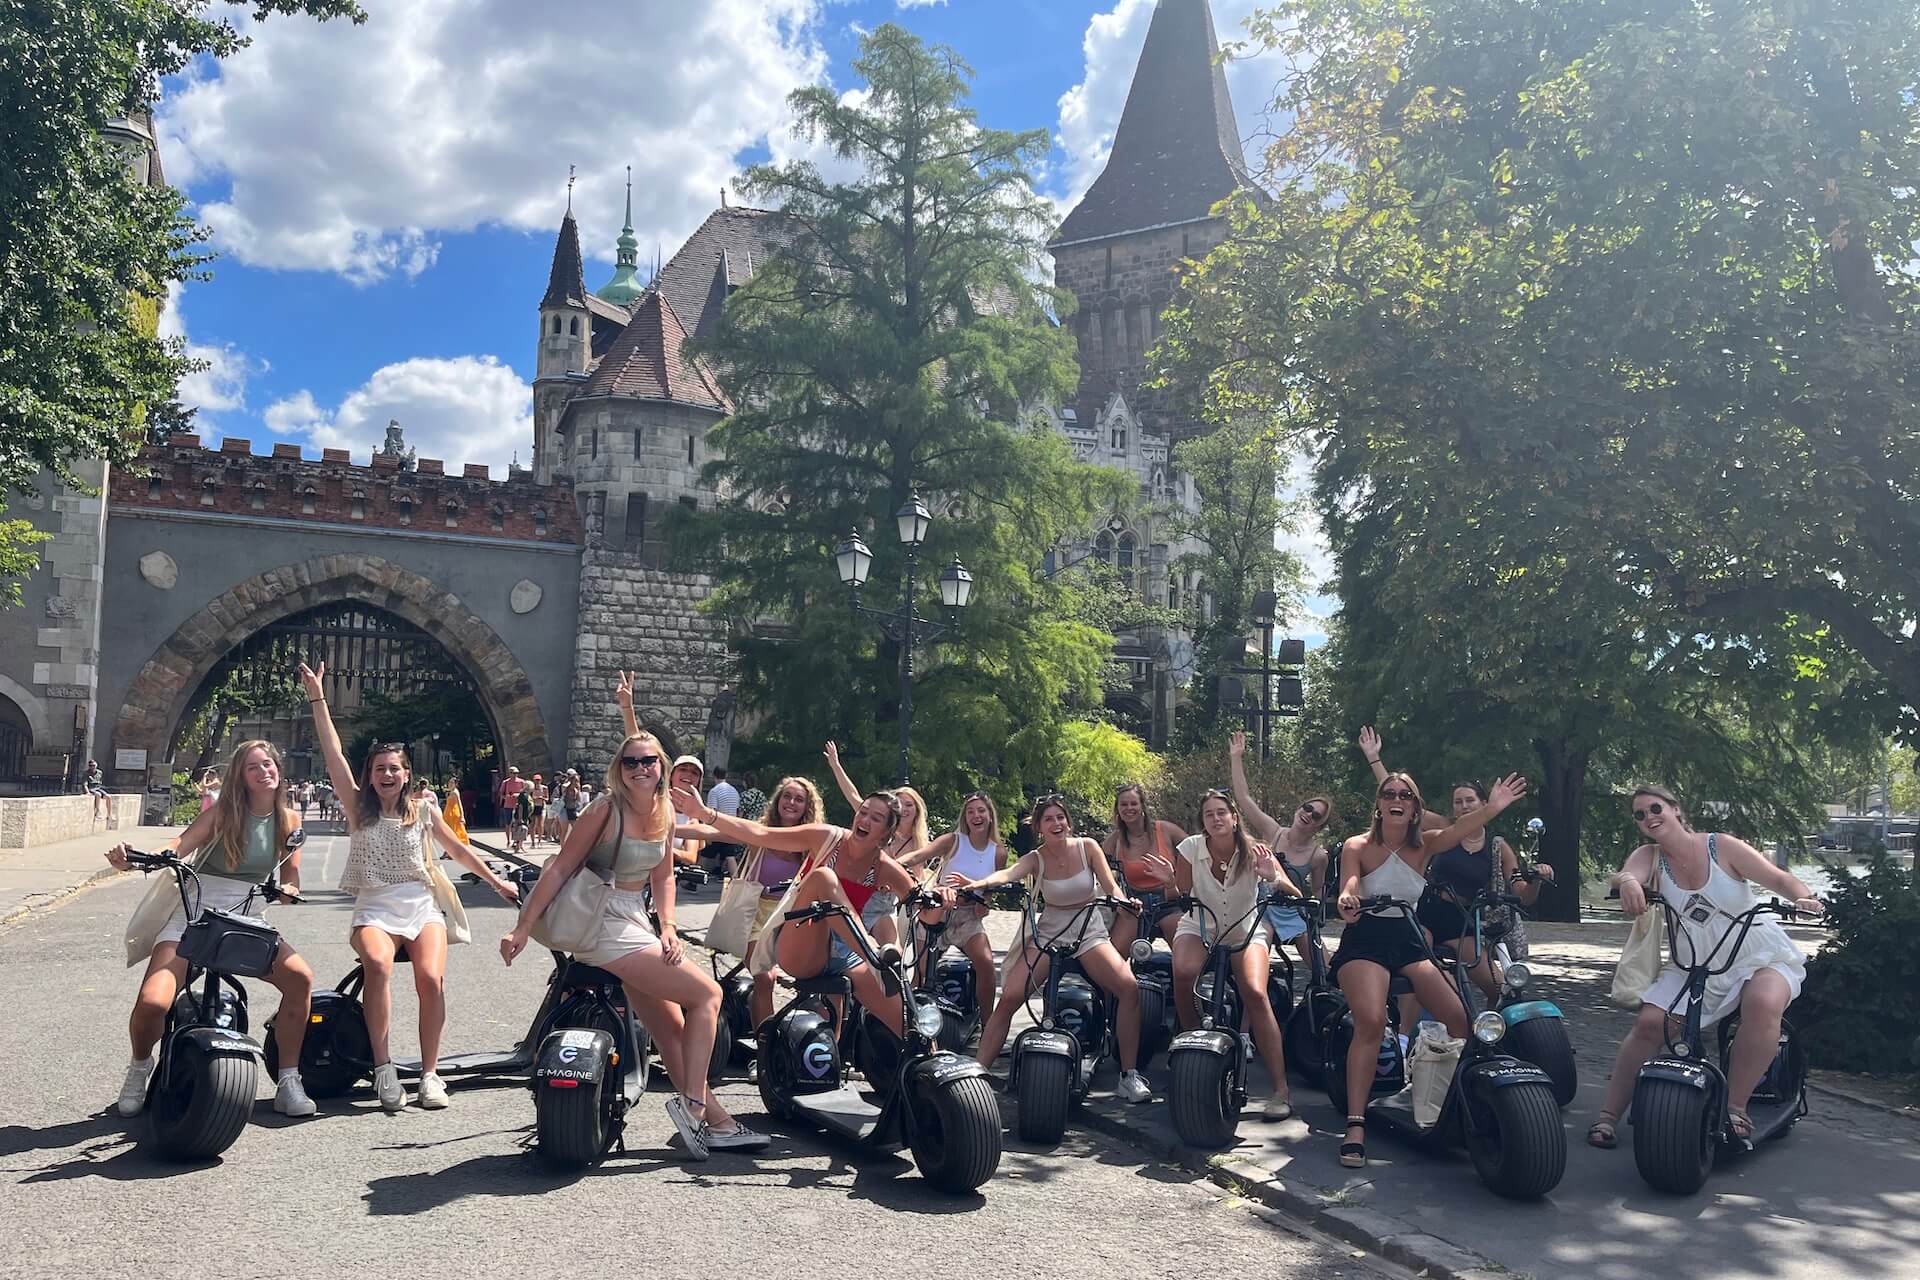 A group of young ladies on E-Scooters near Vajdahunyad Castle